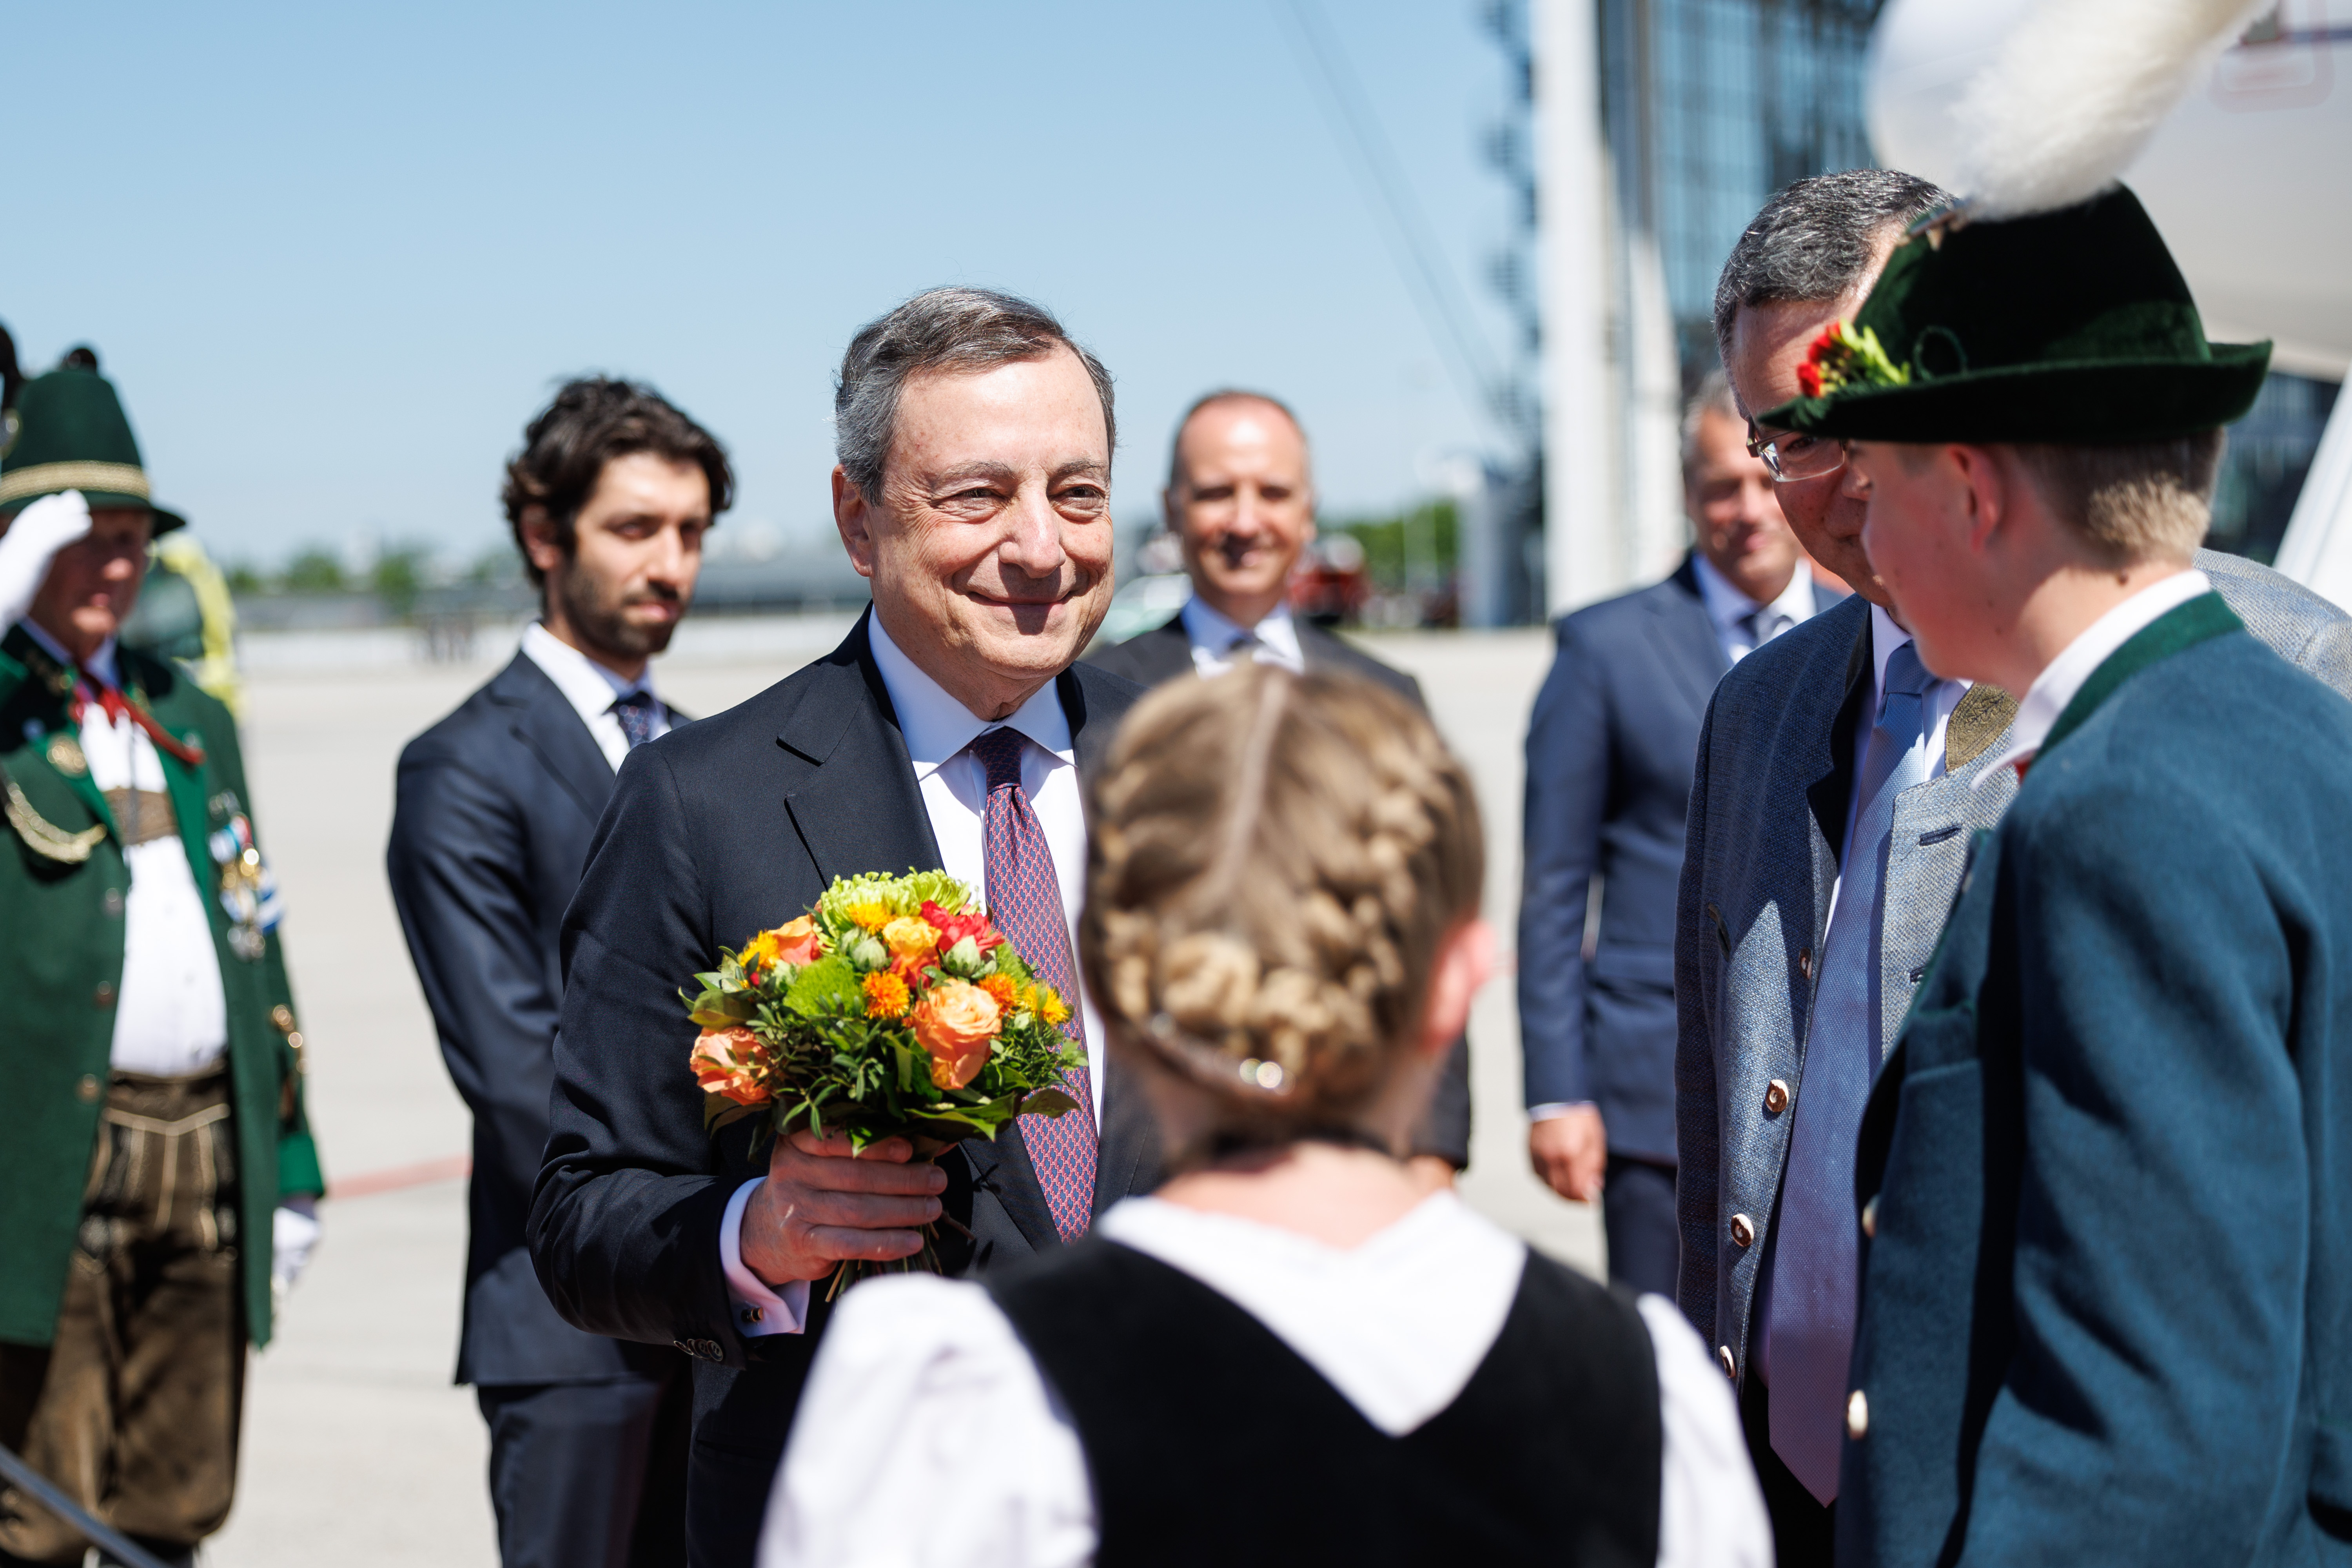 Mario Draghi (Prime Minister of Italy) being welcomed by Florian Herrmann.